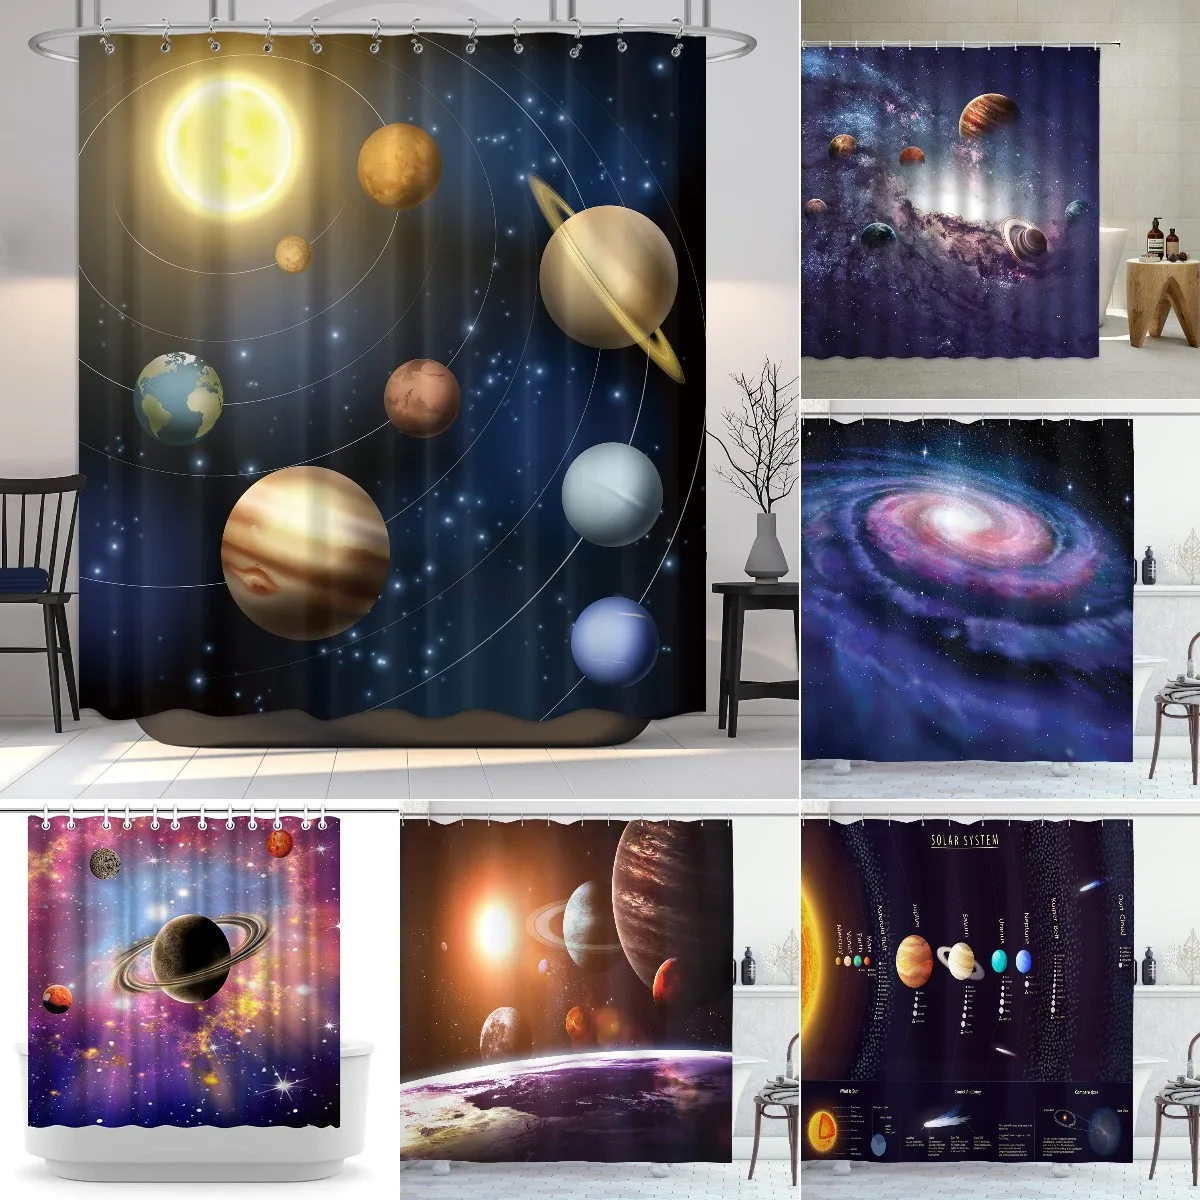 Planet Solar System Shower Curtain with Hooks Pack Universe Galaxy Space Educational Planetary Orbit Decor Fabric Bathroom Set